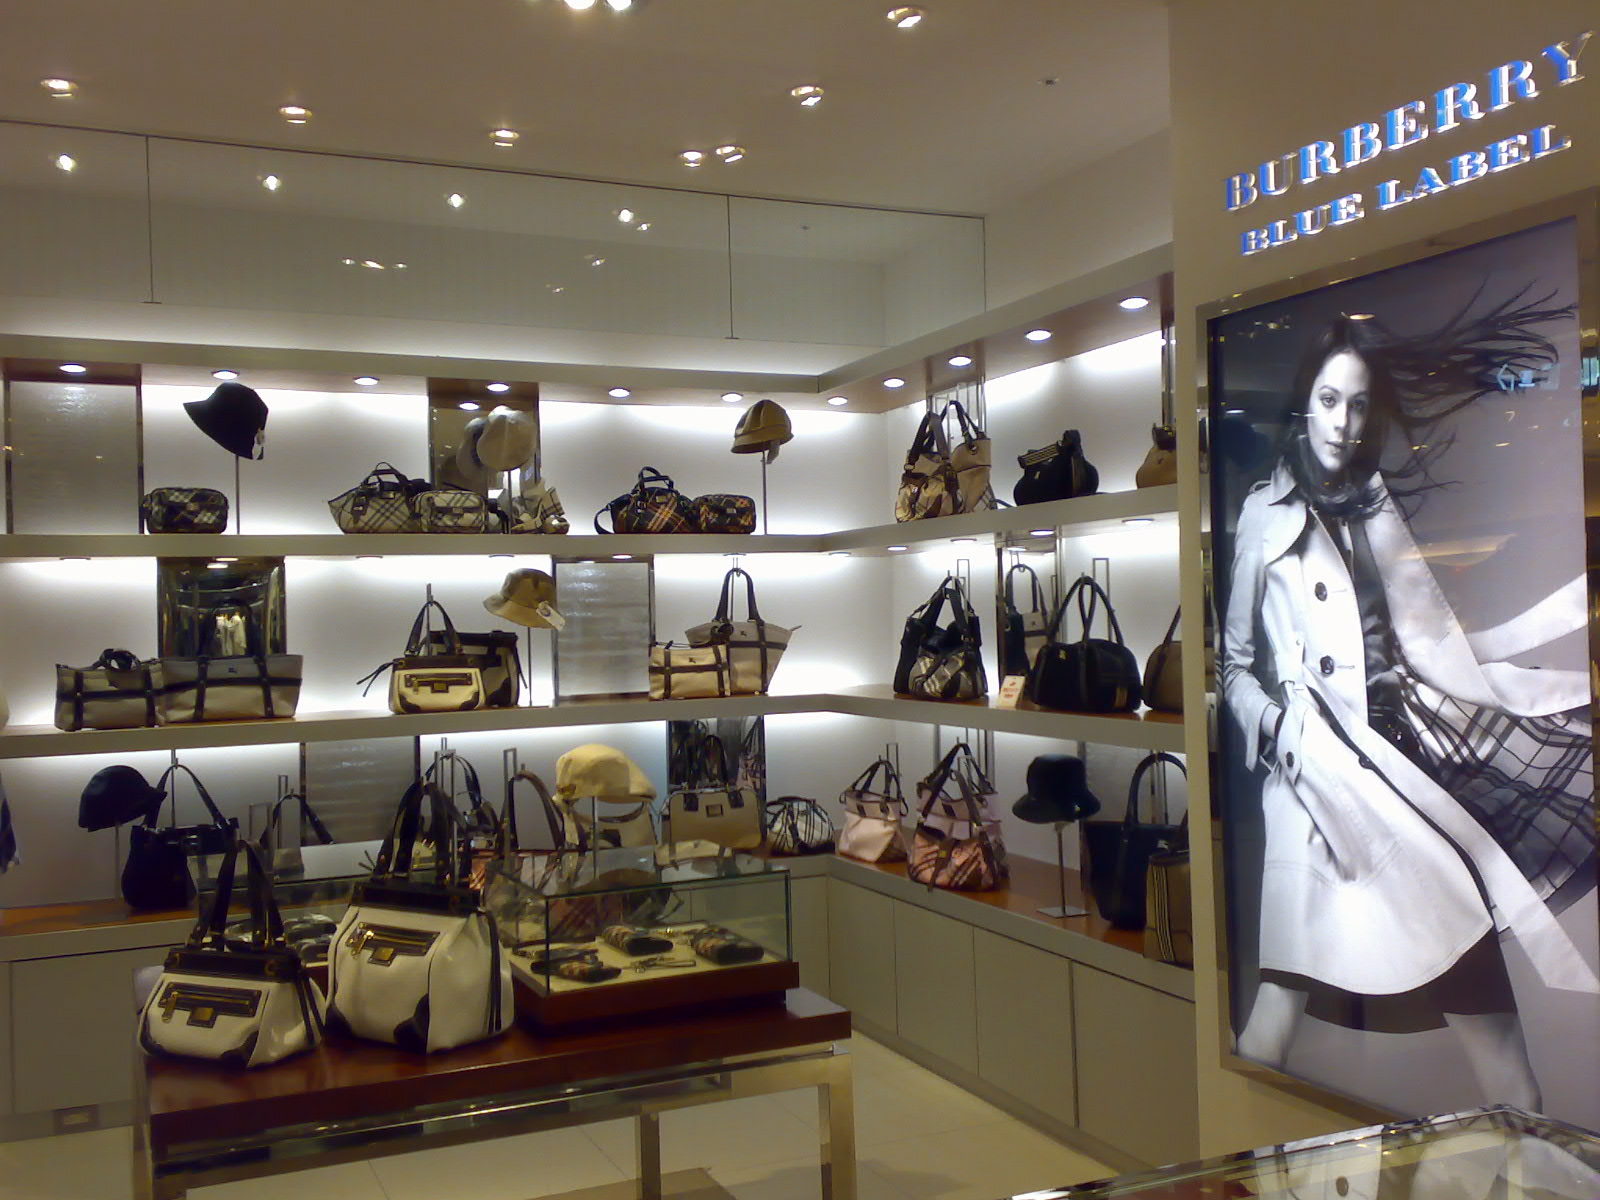 Burberry Blue Label – A glimpse of a BBL boutique in Jul 08 | Burberry